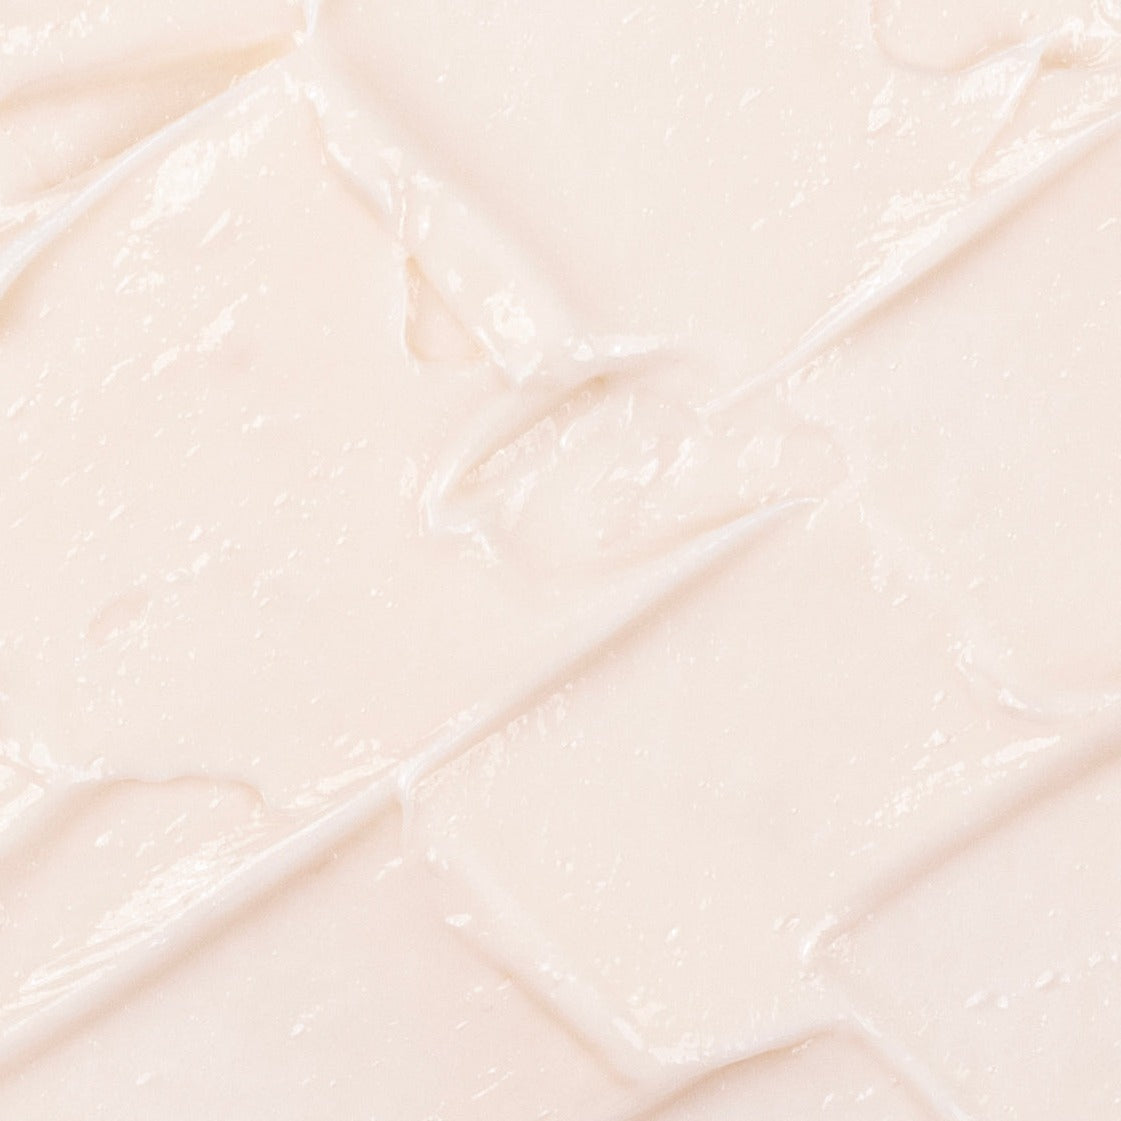 image of the texture of upcircle beauty's conditioner creme